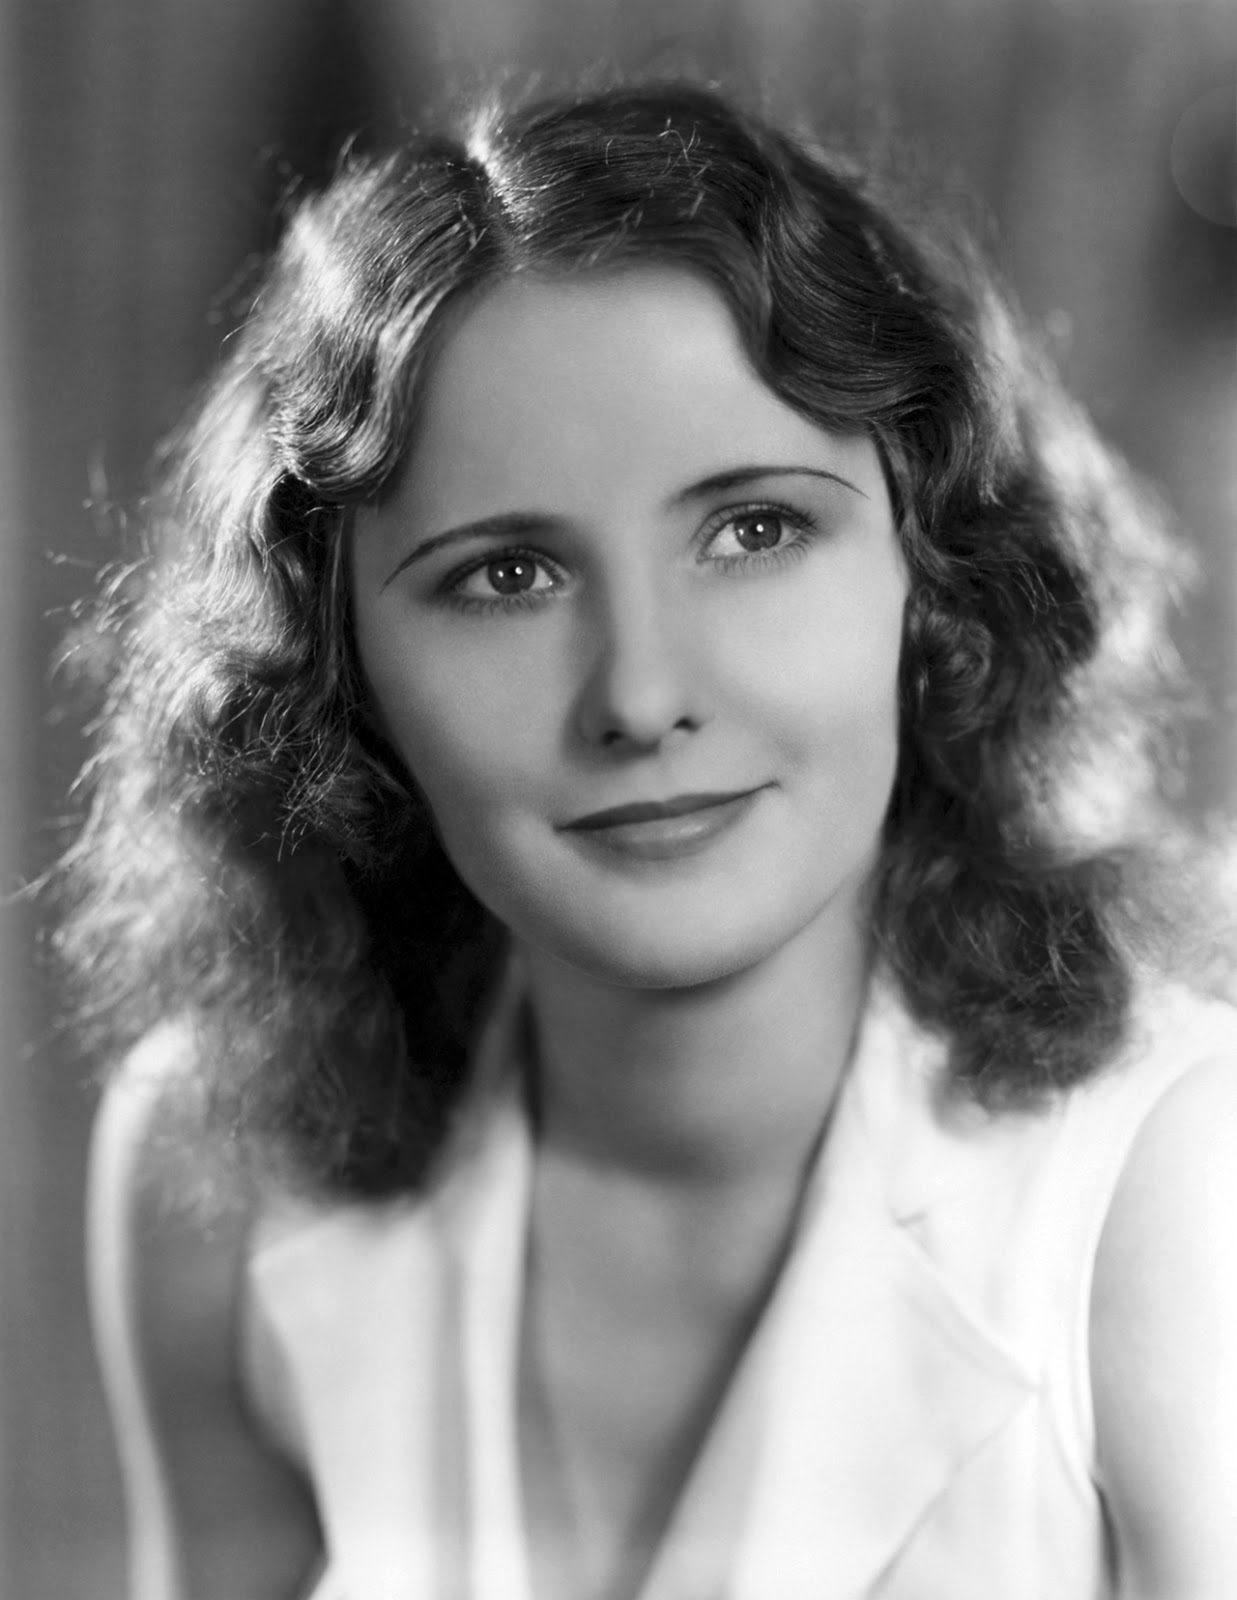 The Girl with the White Parasol: I'm Hosting The Barbara Stanwyck